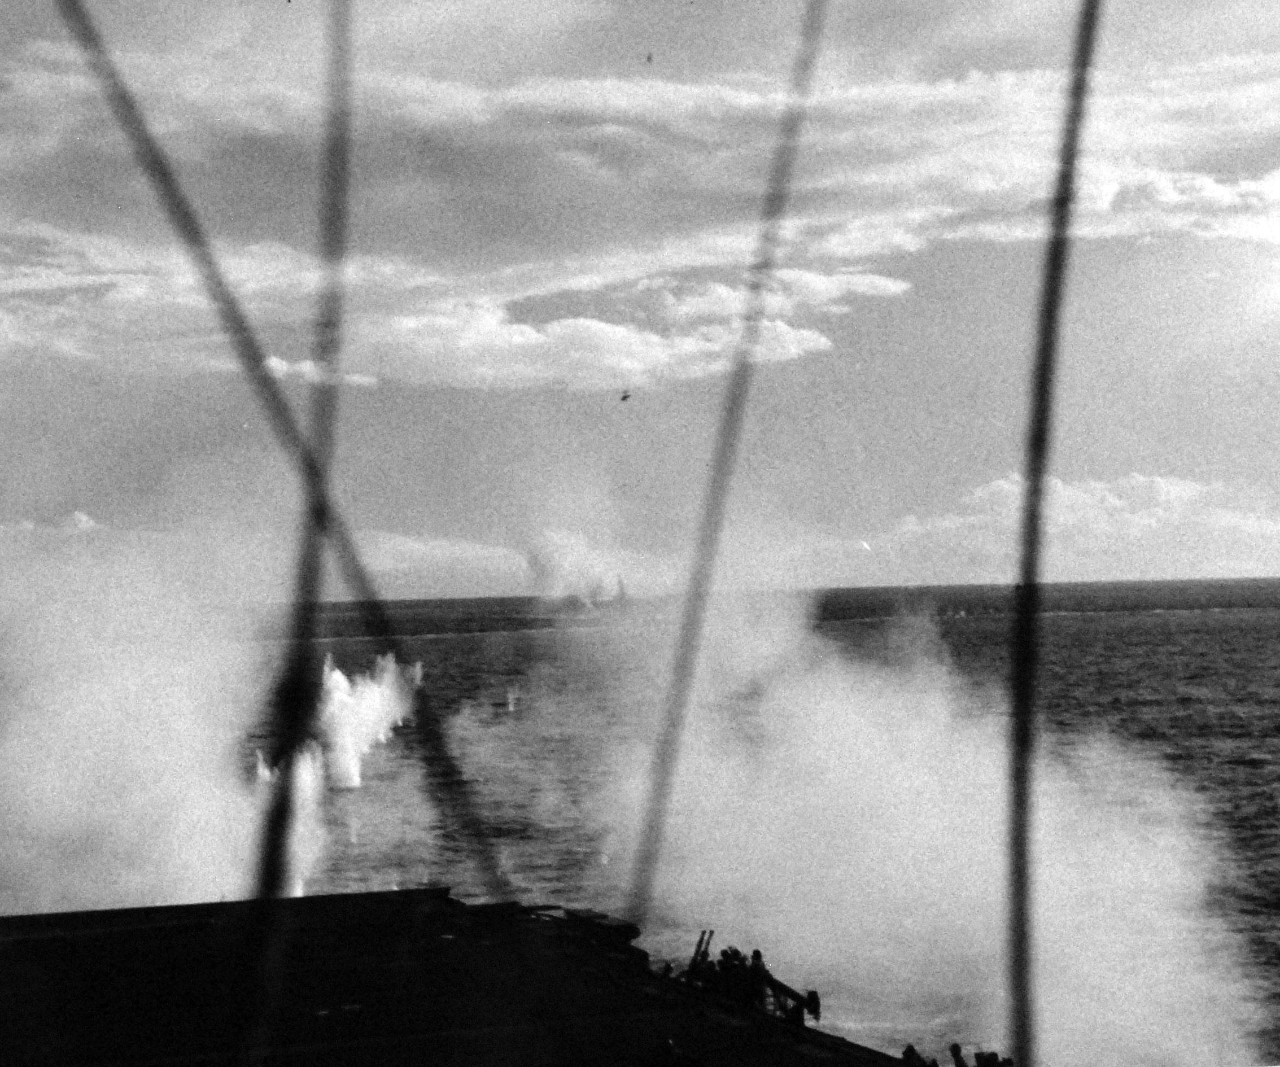 80-G-270624:  USS Suwannee (CVE-27), October 25, 1944.  Anti-Aircraft Fire at a Japanese “Zero” during its attempt to make a suicide dive into the flight deck of USS Suwannee (CVE-27) at Leyte, Philippines, taken from USS Sangamon (CVE-26).  Official U.S. Navy photograph, now in the collections of the National Archives.  